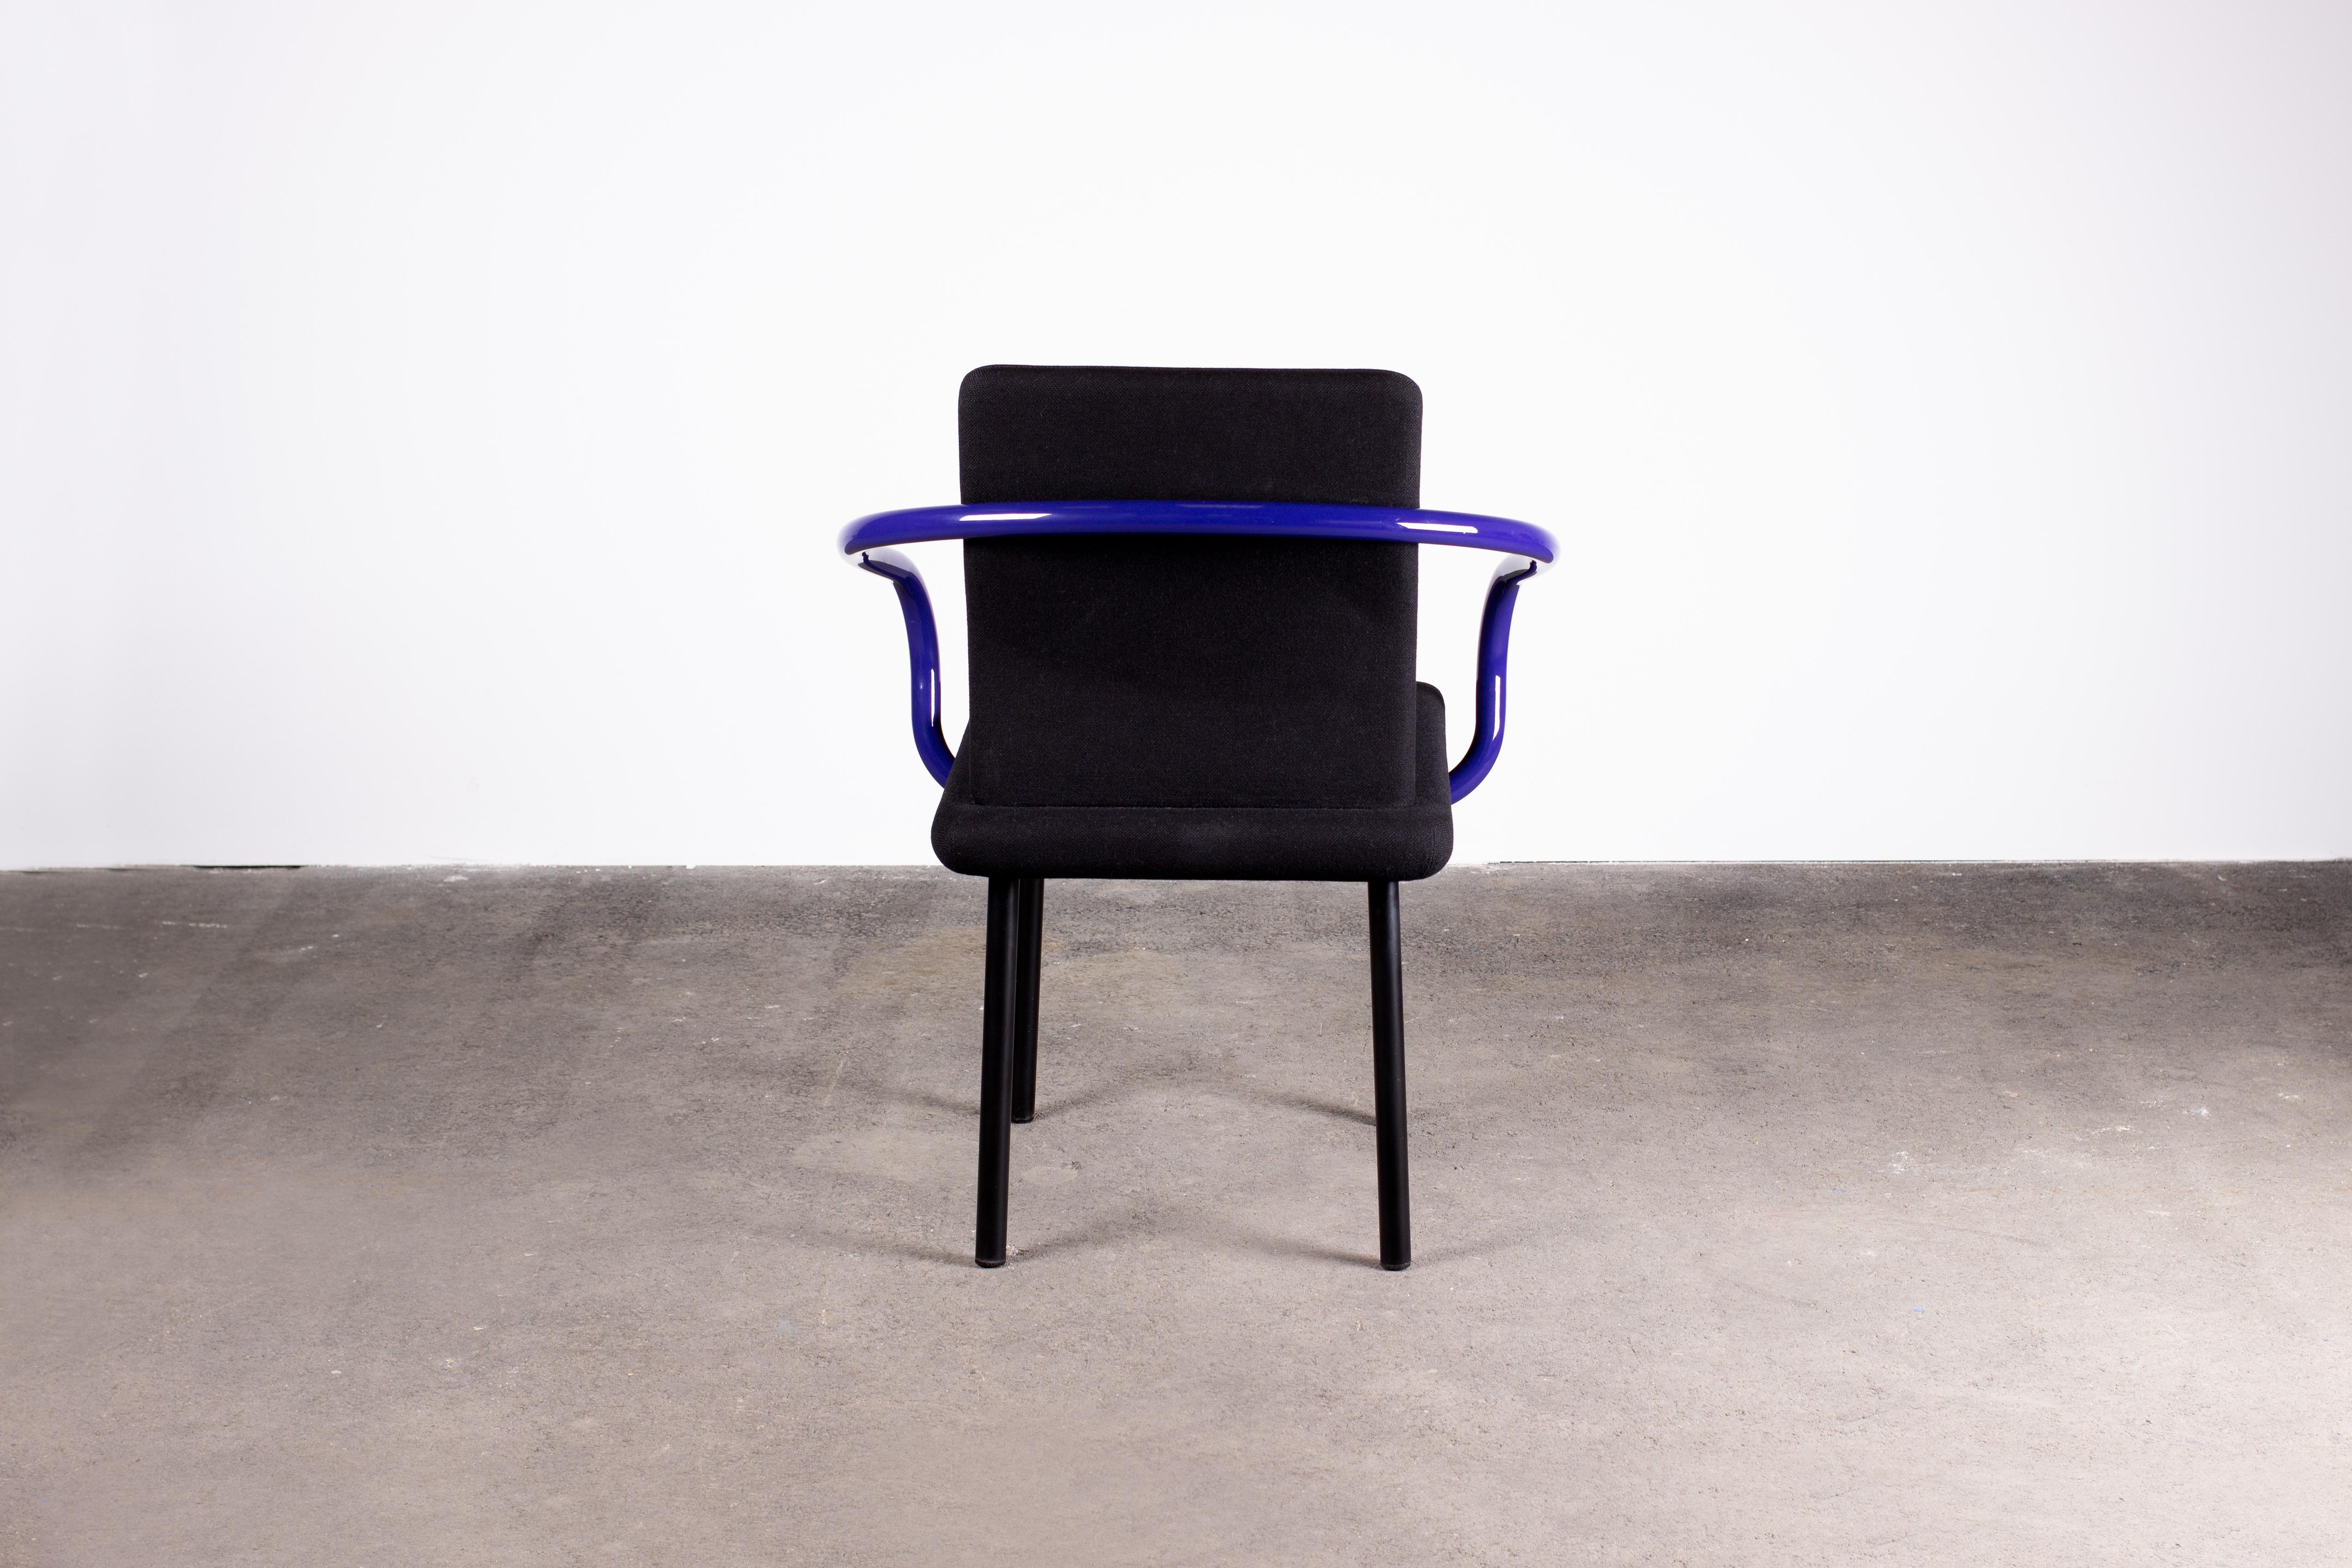 Lacquered Pair of Ettore Sottsass Mandarin Chairs for Knoll in Violet & Black